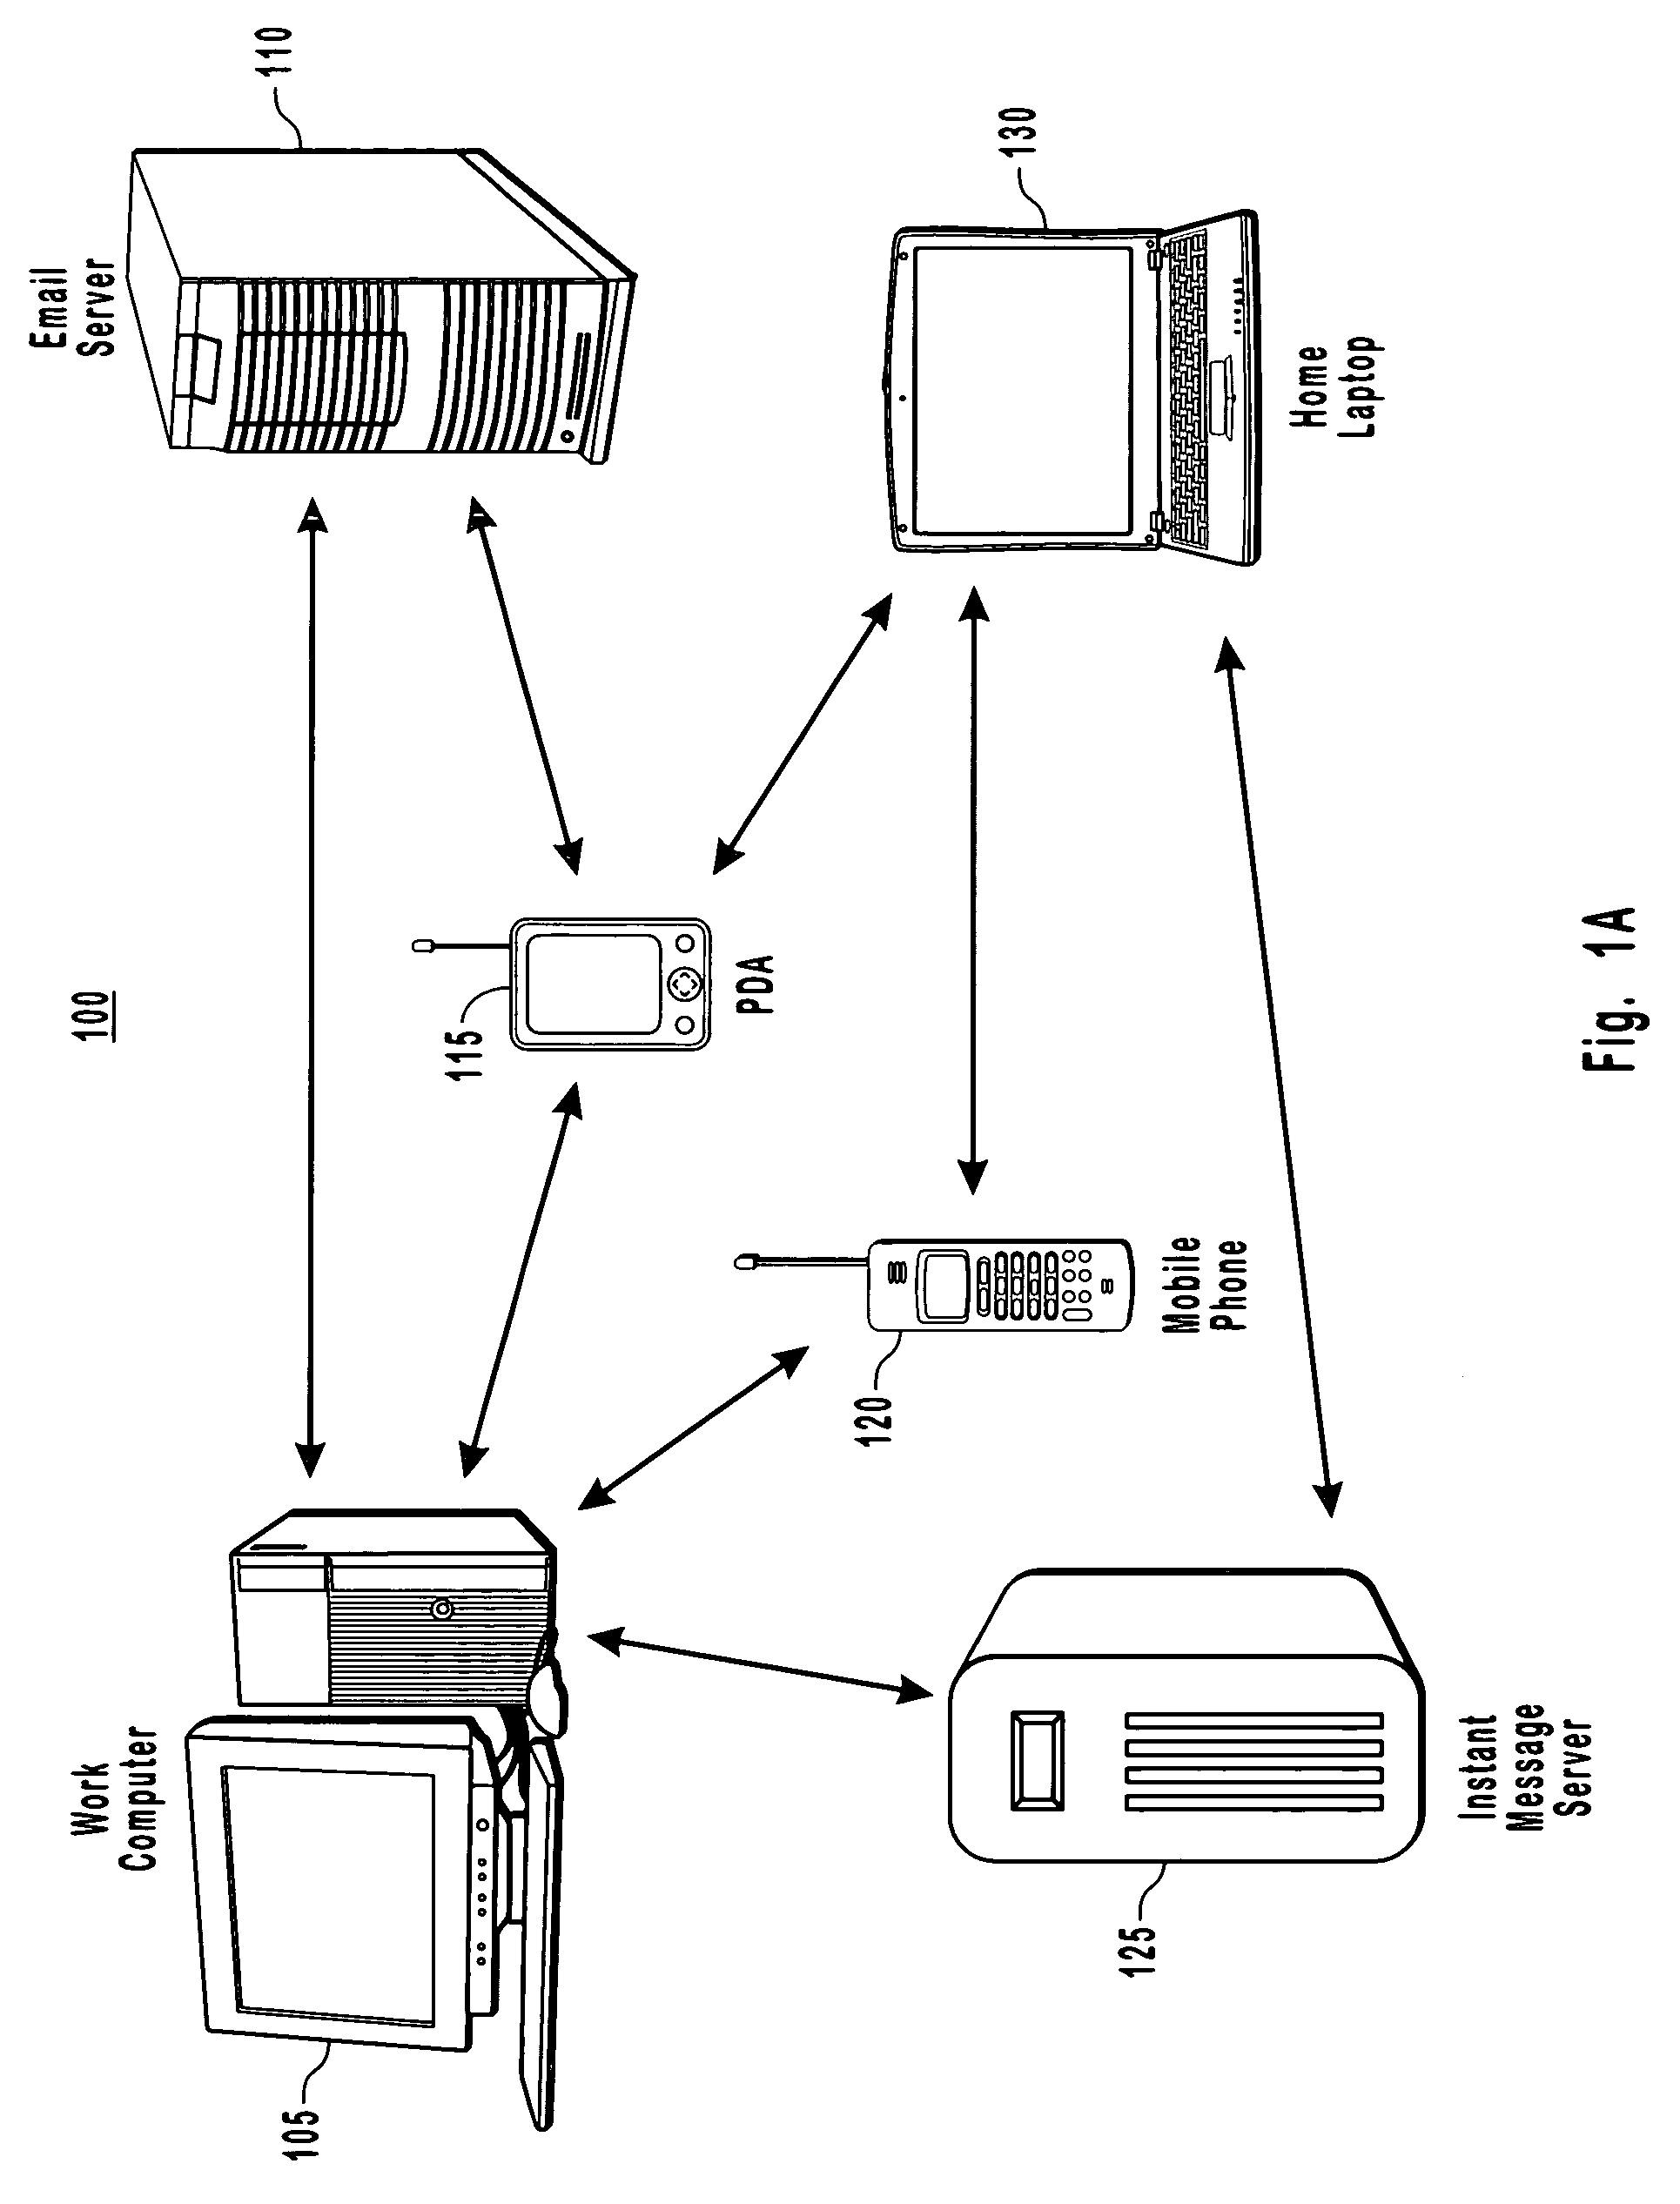 Methods and systems for halting synchronization loops in a distributed system